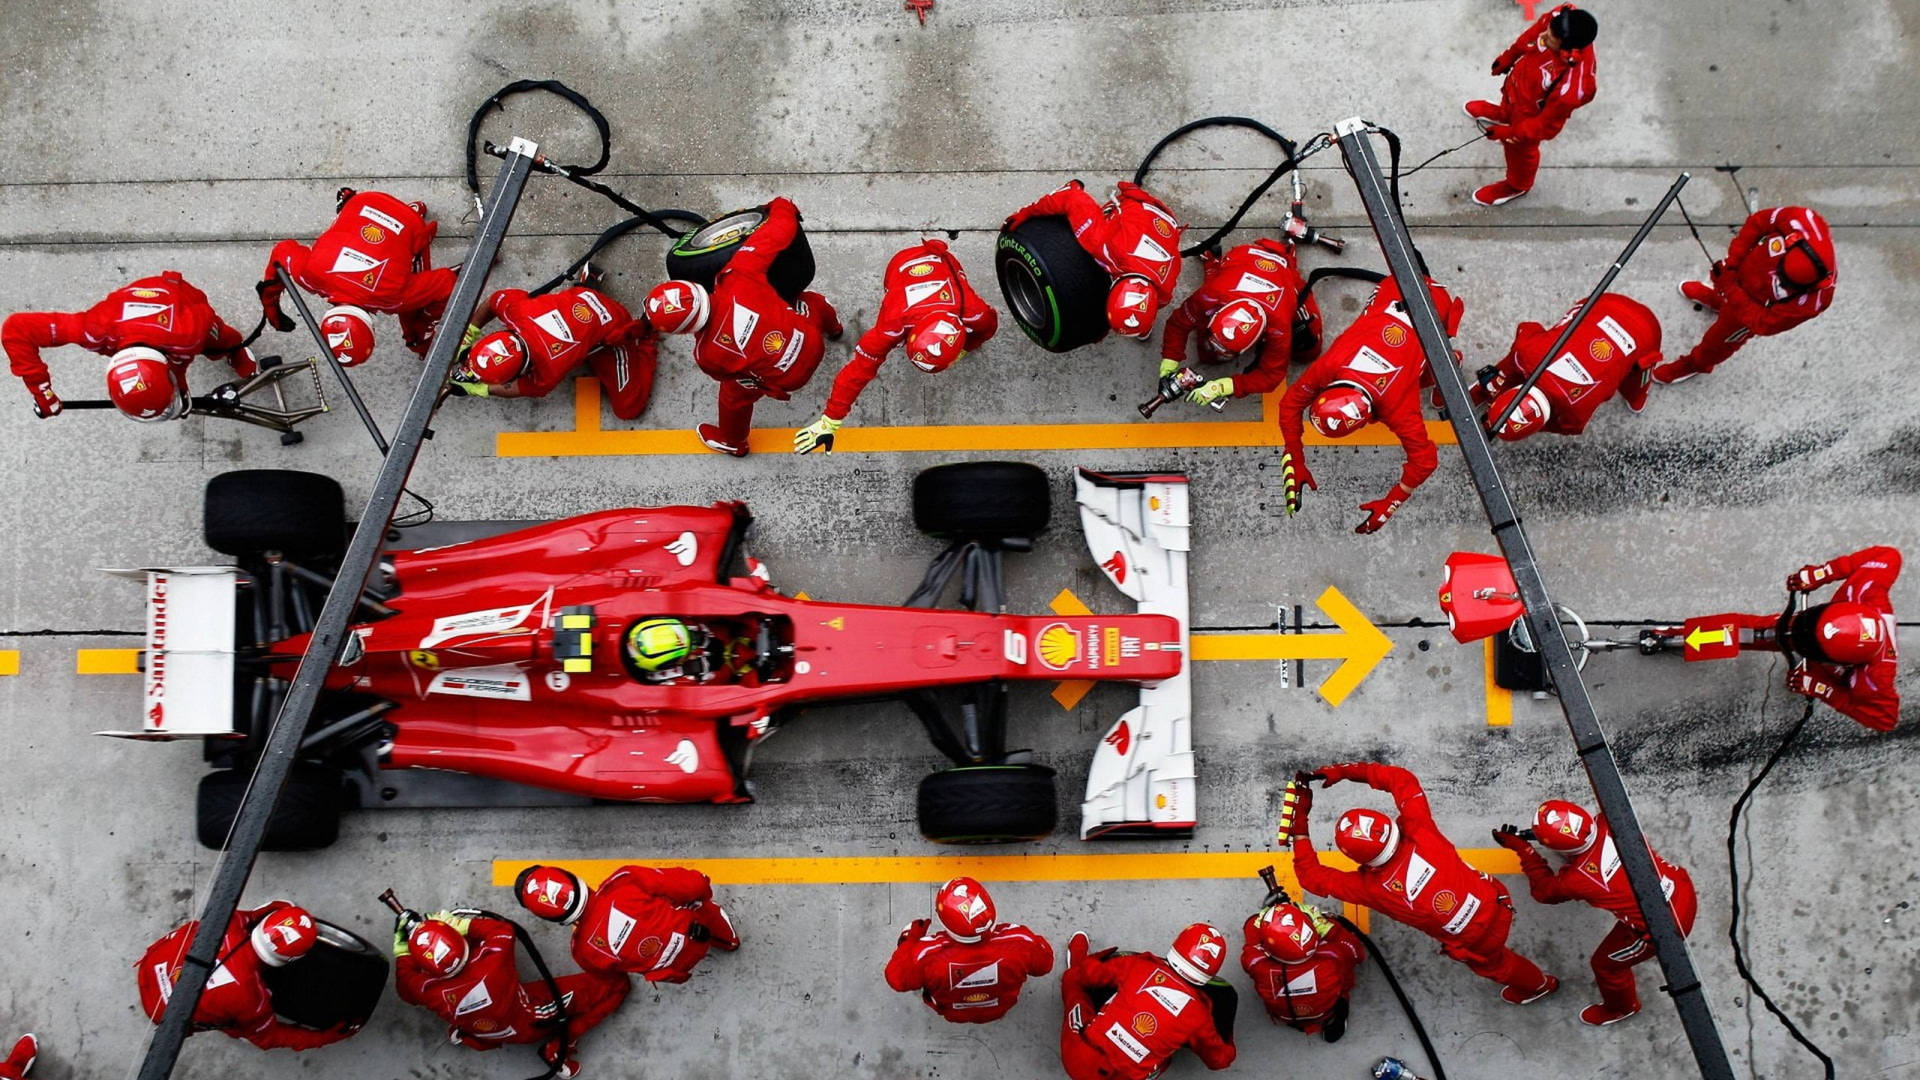 A Pulse-racing Moment At A F1 Pit Stop Background